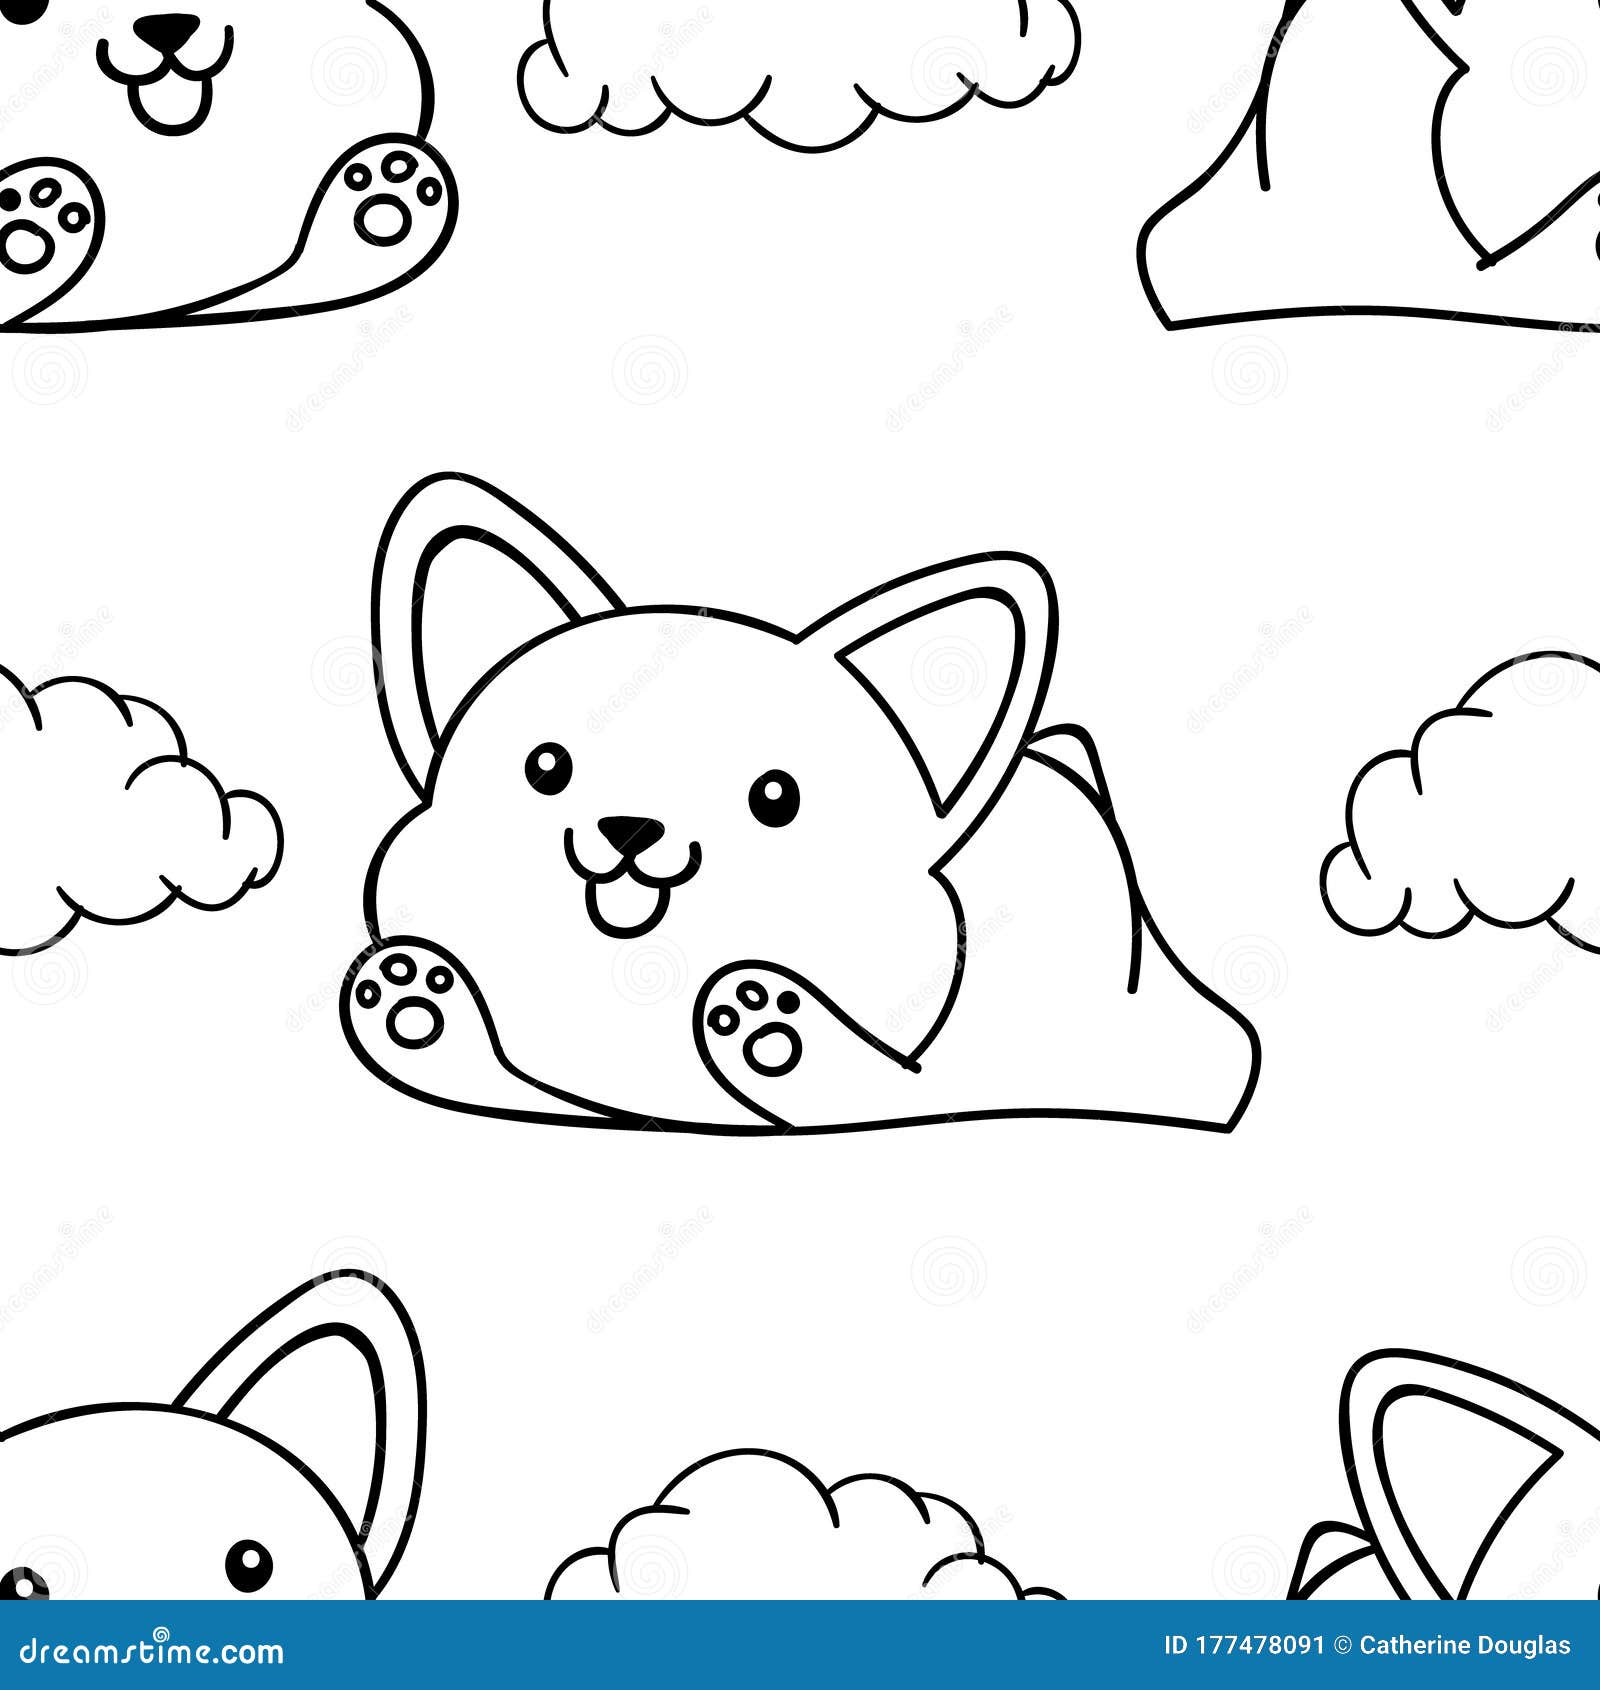 Download Simple Seamless Pattern, Black And White Cute Kawaii Hand Drawn Dog Doodles, Coloring Pages ...